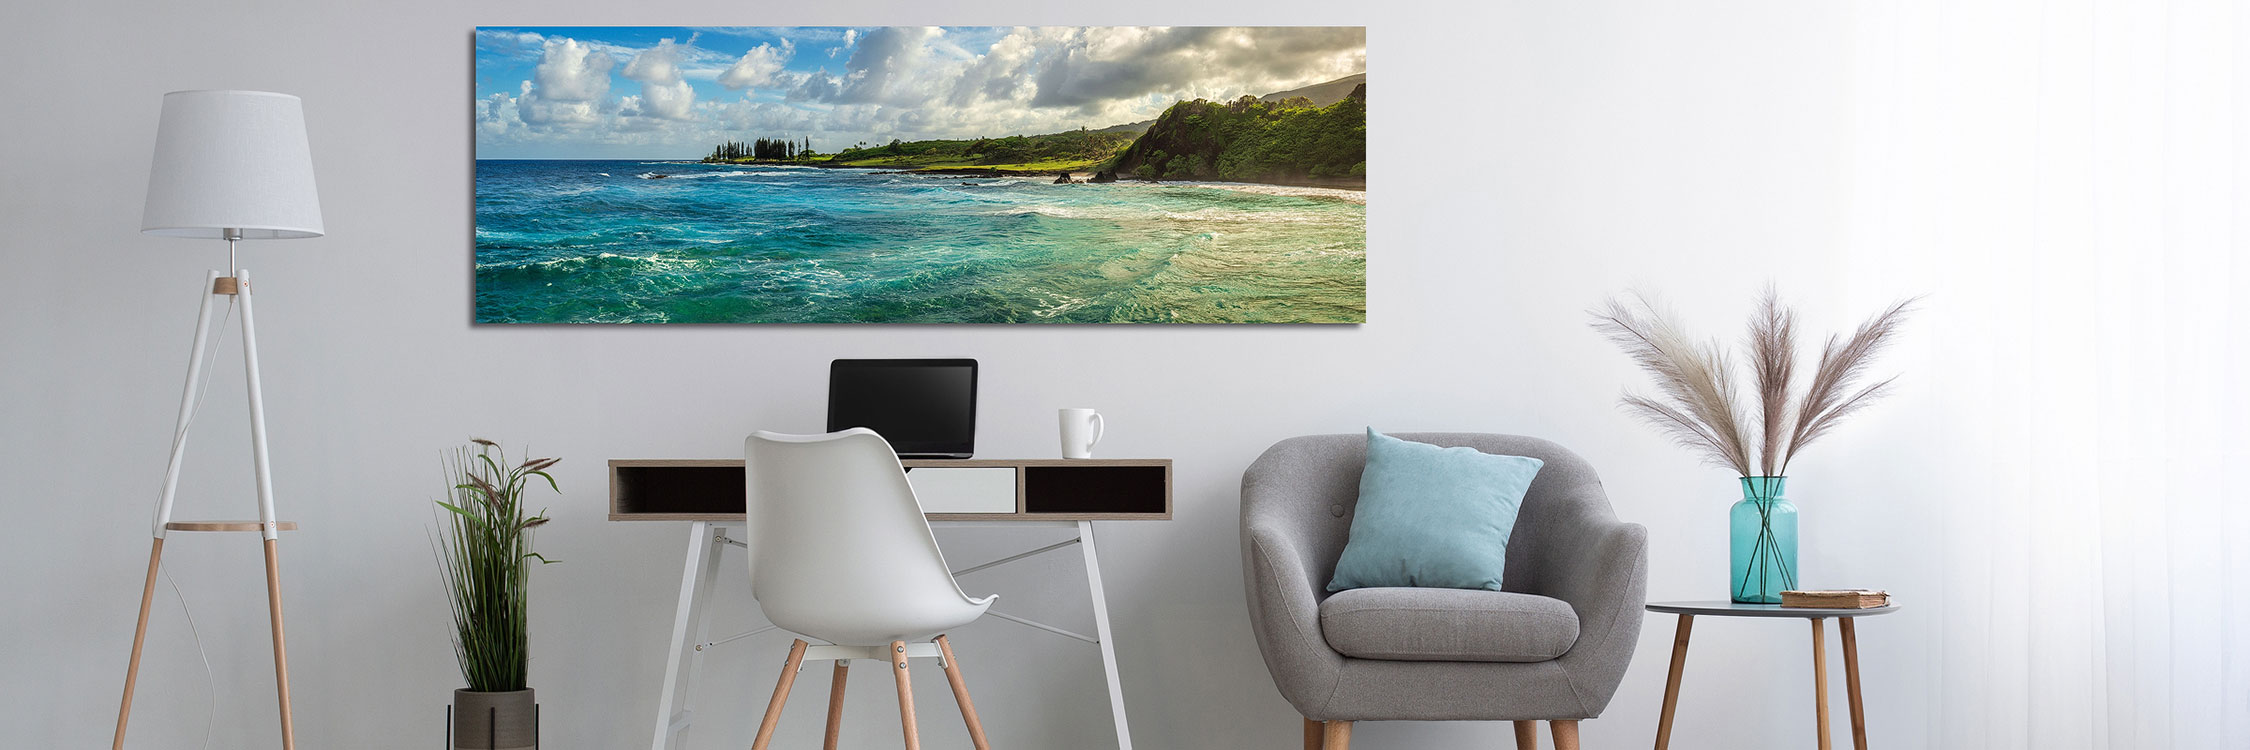 A contemporary home office with a panoramic luxury wall art print on the wall, featuring a Hawaiian beach - Gintchin Fine Art